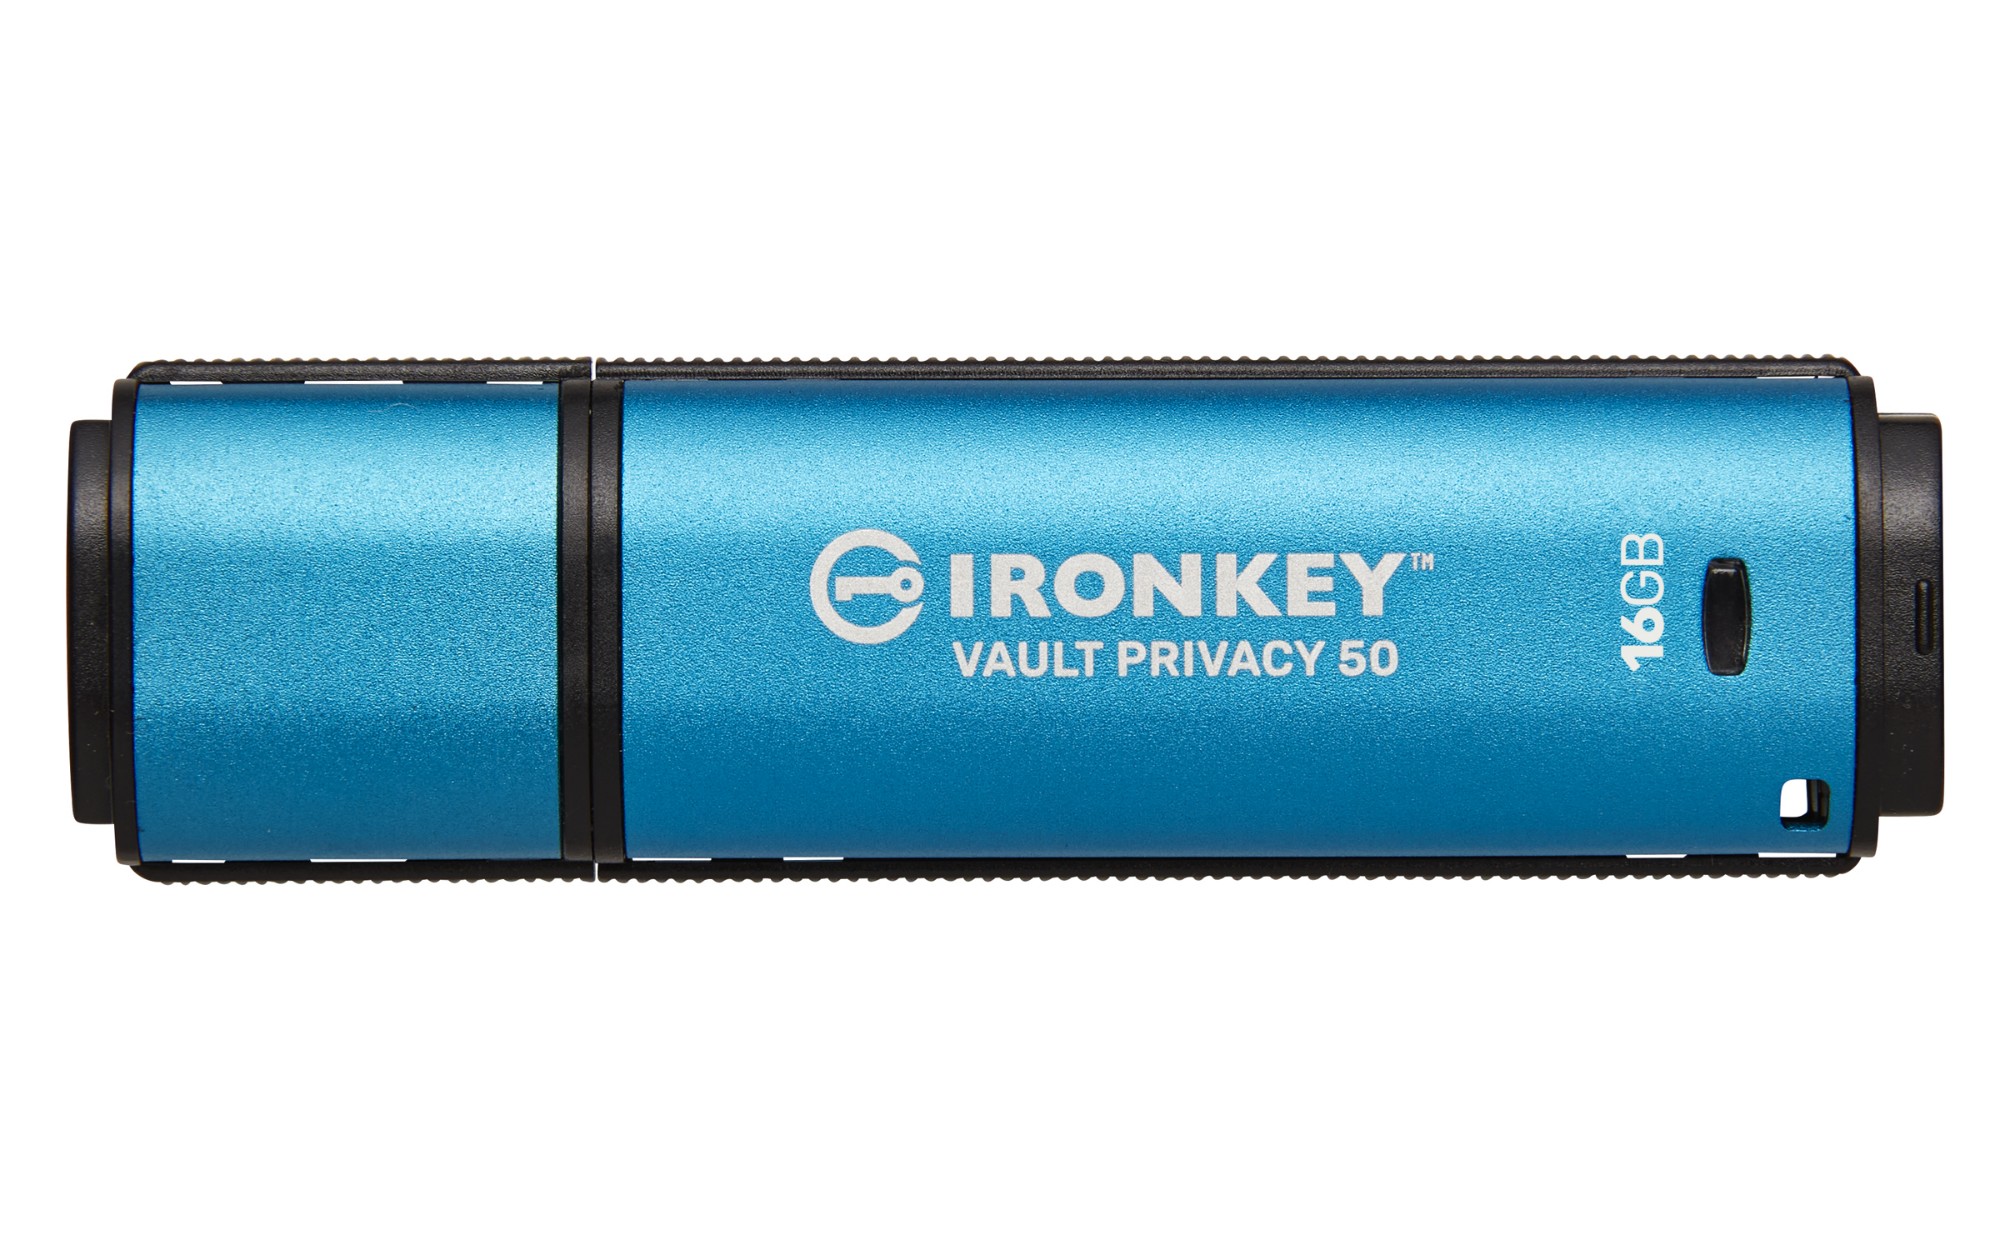 Kingston Technology IronKey 16GB Vault Privacy 50 AES-256 Encrypted, FIPS 197